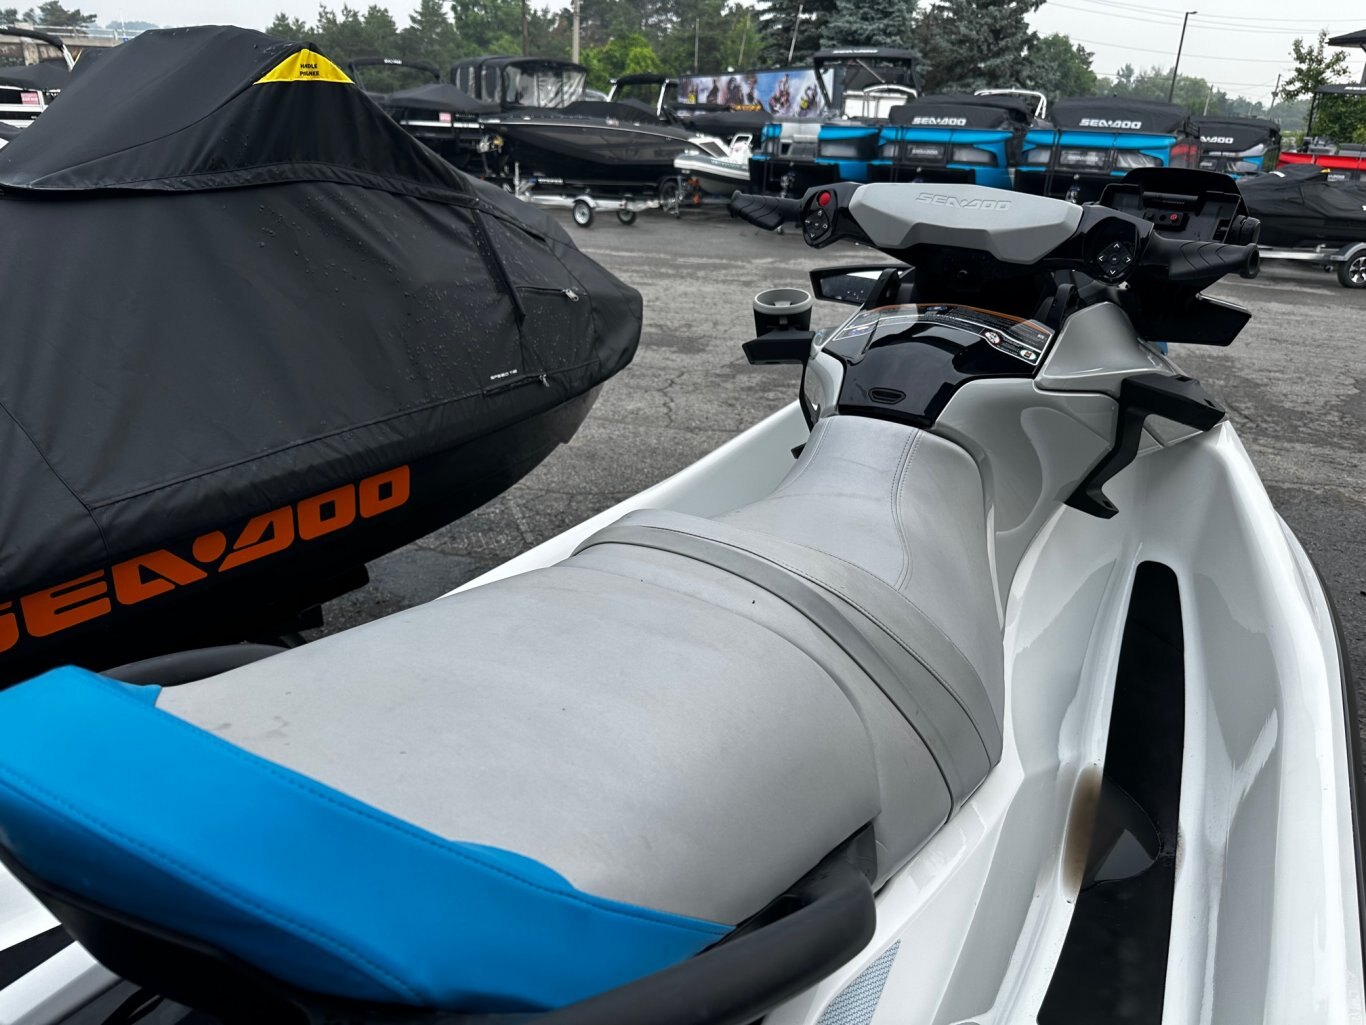 2022 Sea Doo Fish Pro Scout 130 WITH iDF